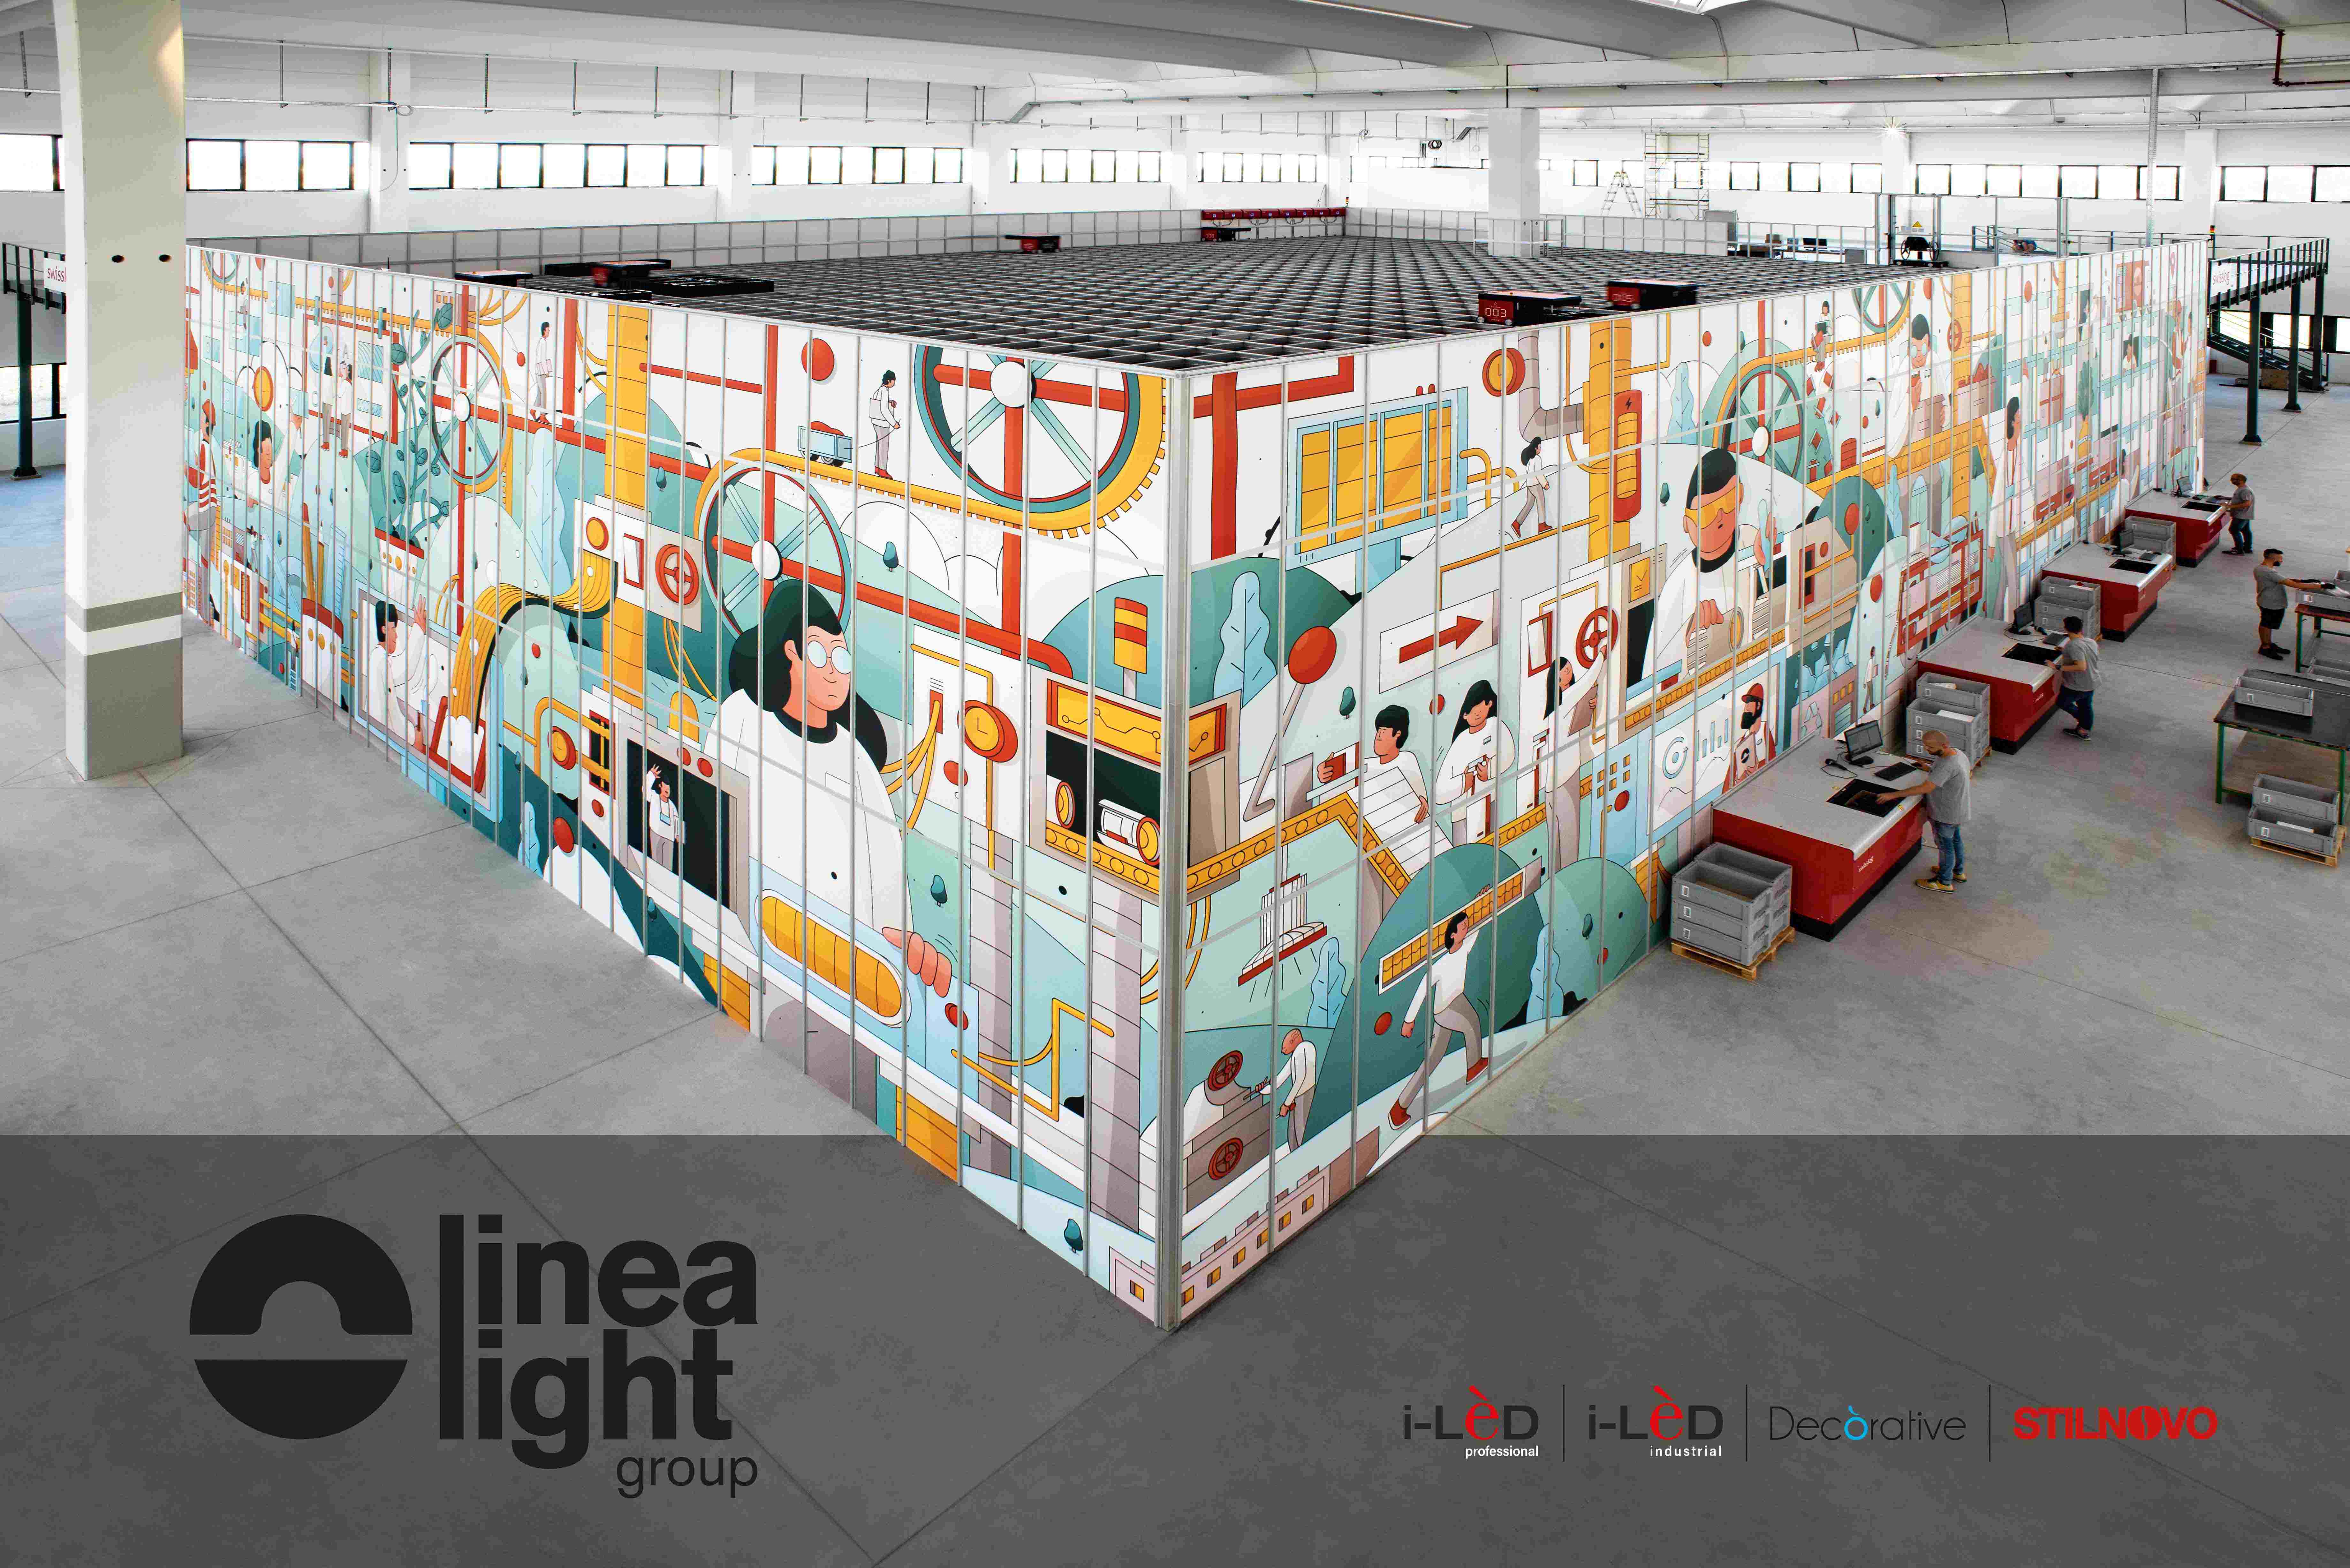 photo from inside of the light group linea building with people working